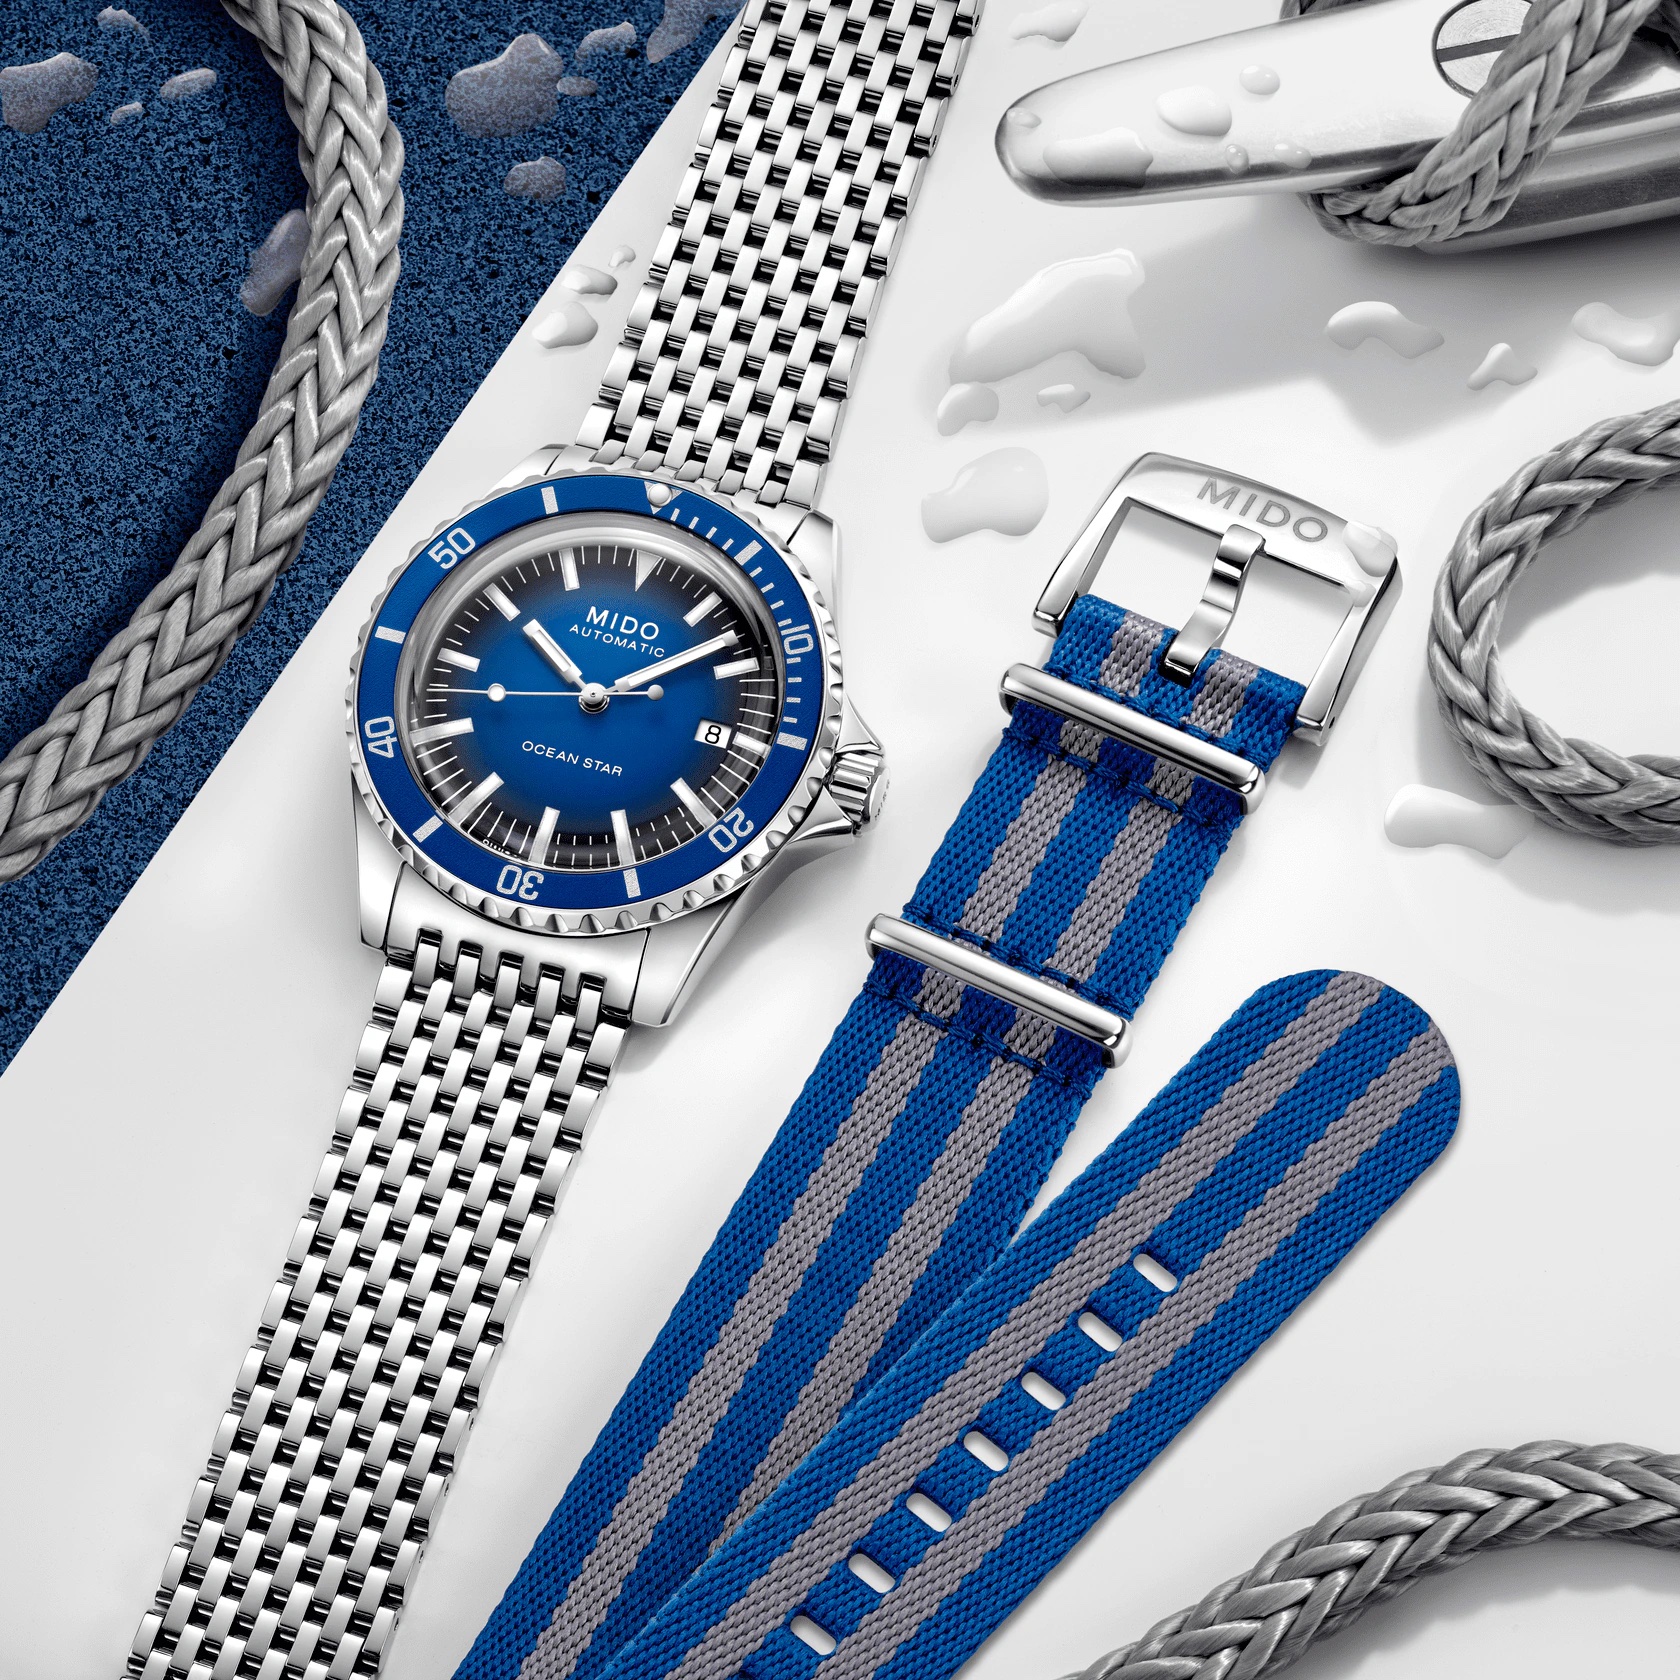 Mido Ocean Star Tribute Limited Edition Italy M026.807.11.041.00 Lifestyle